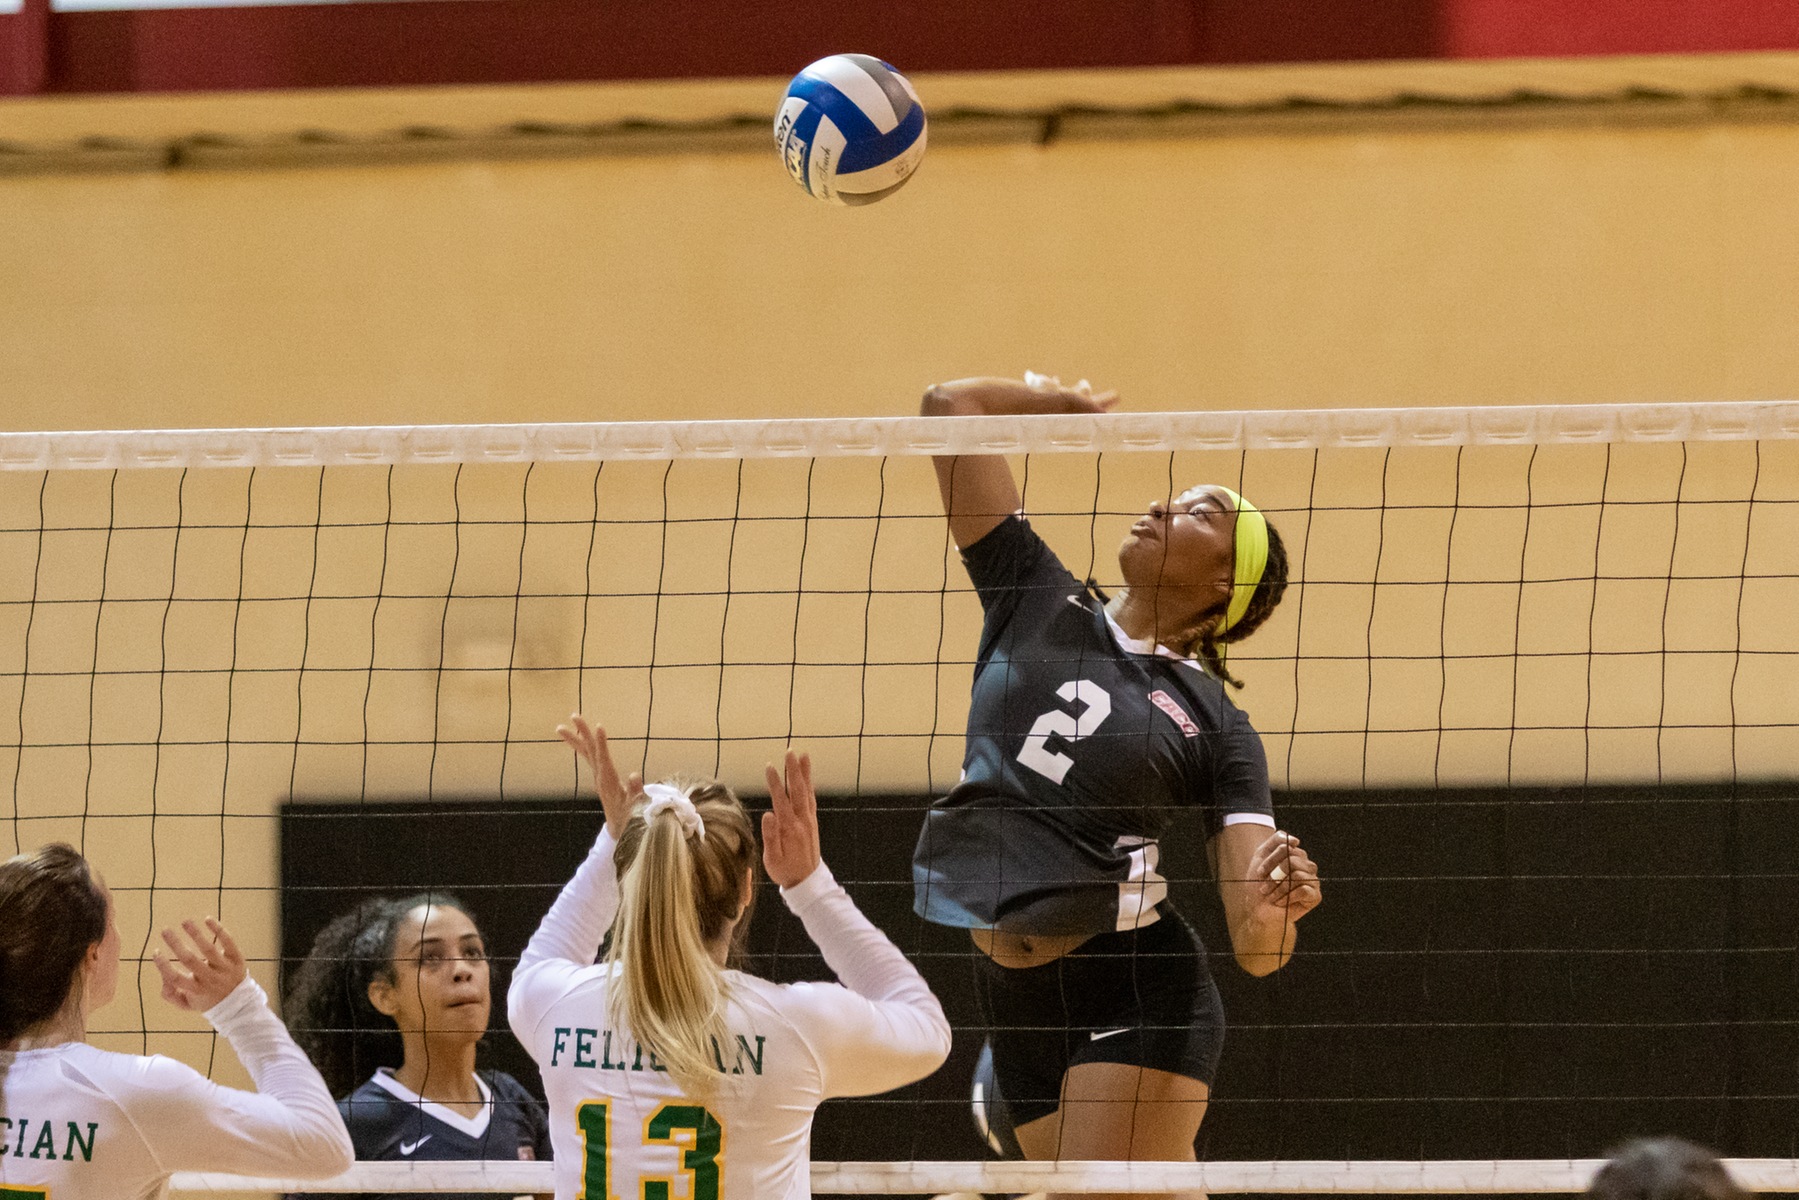 COUGARS RALLY TO UPEND WOMEN'S VOLLEYBALL